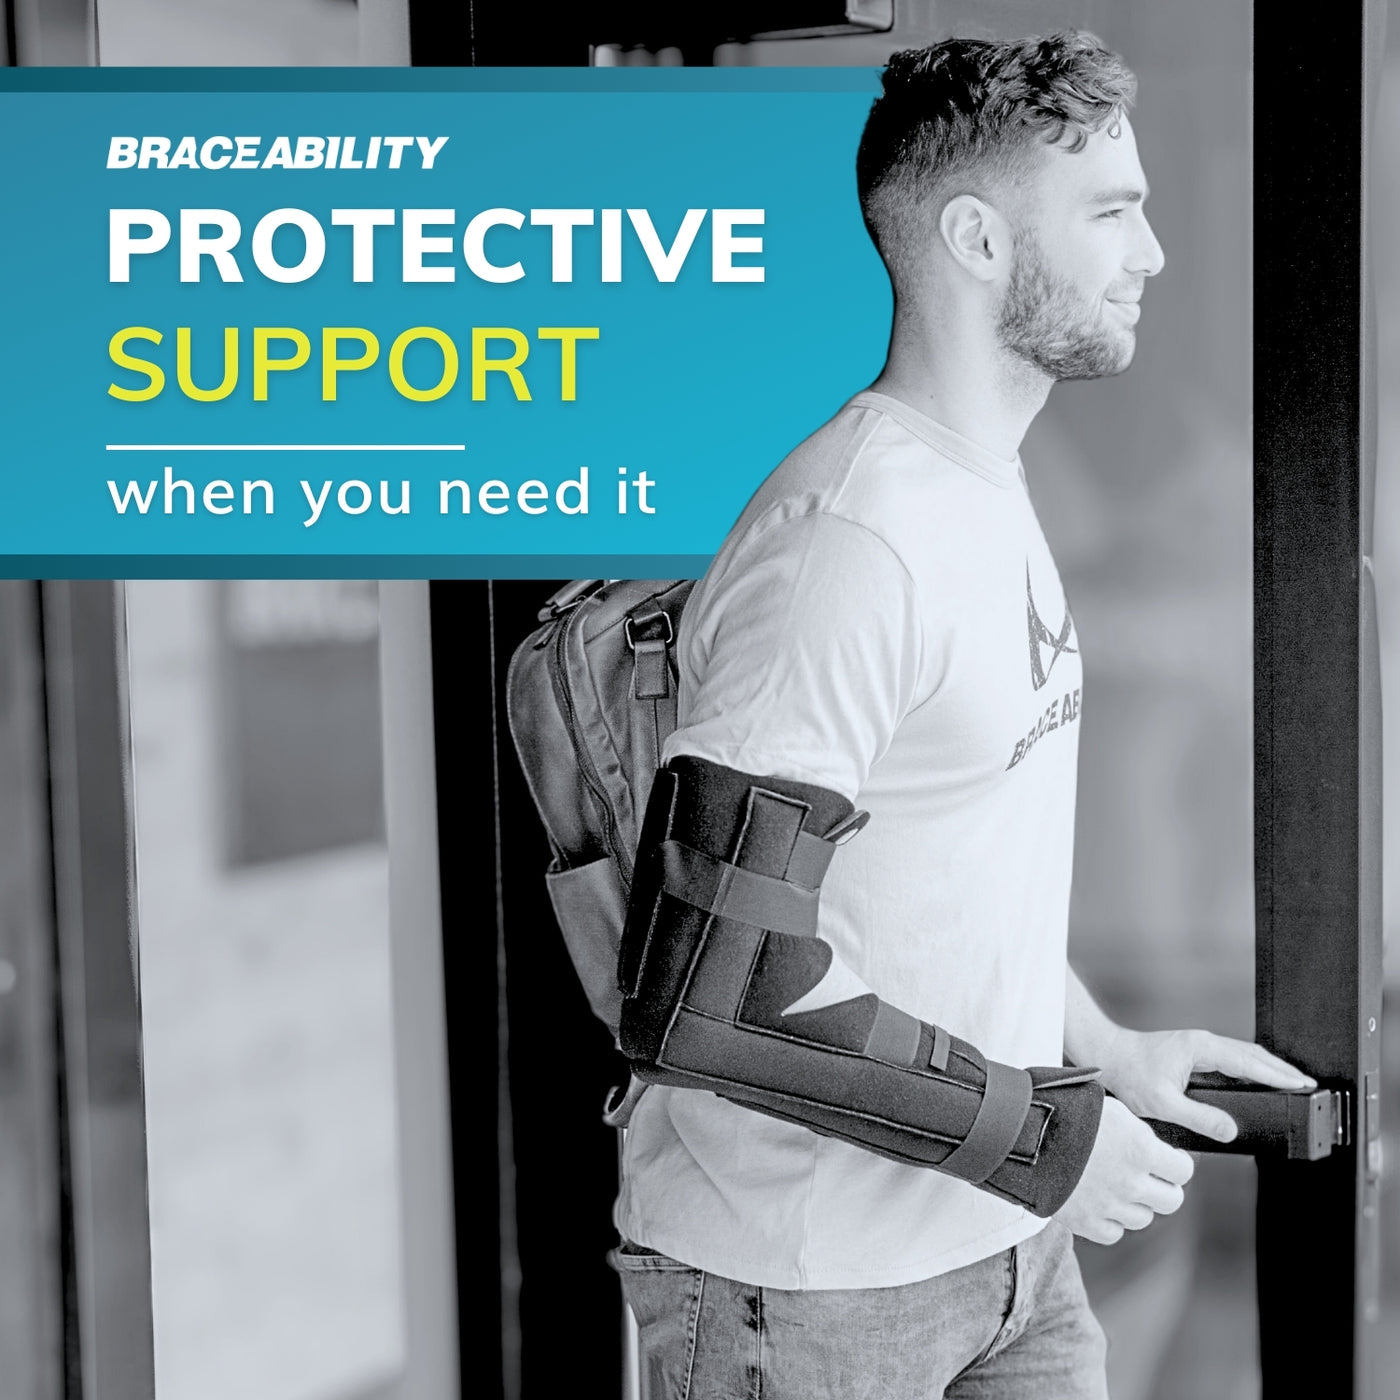 The comfortable elbow fracture splint gives you protection all day or night